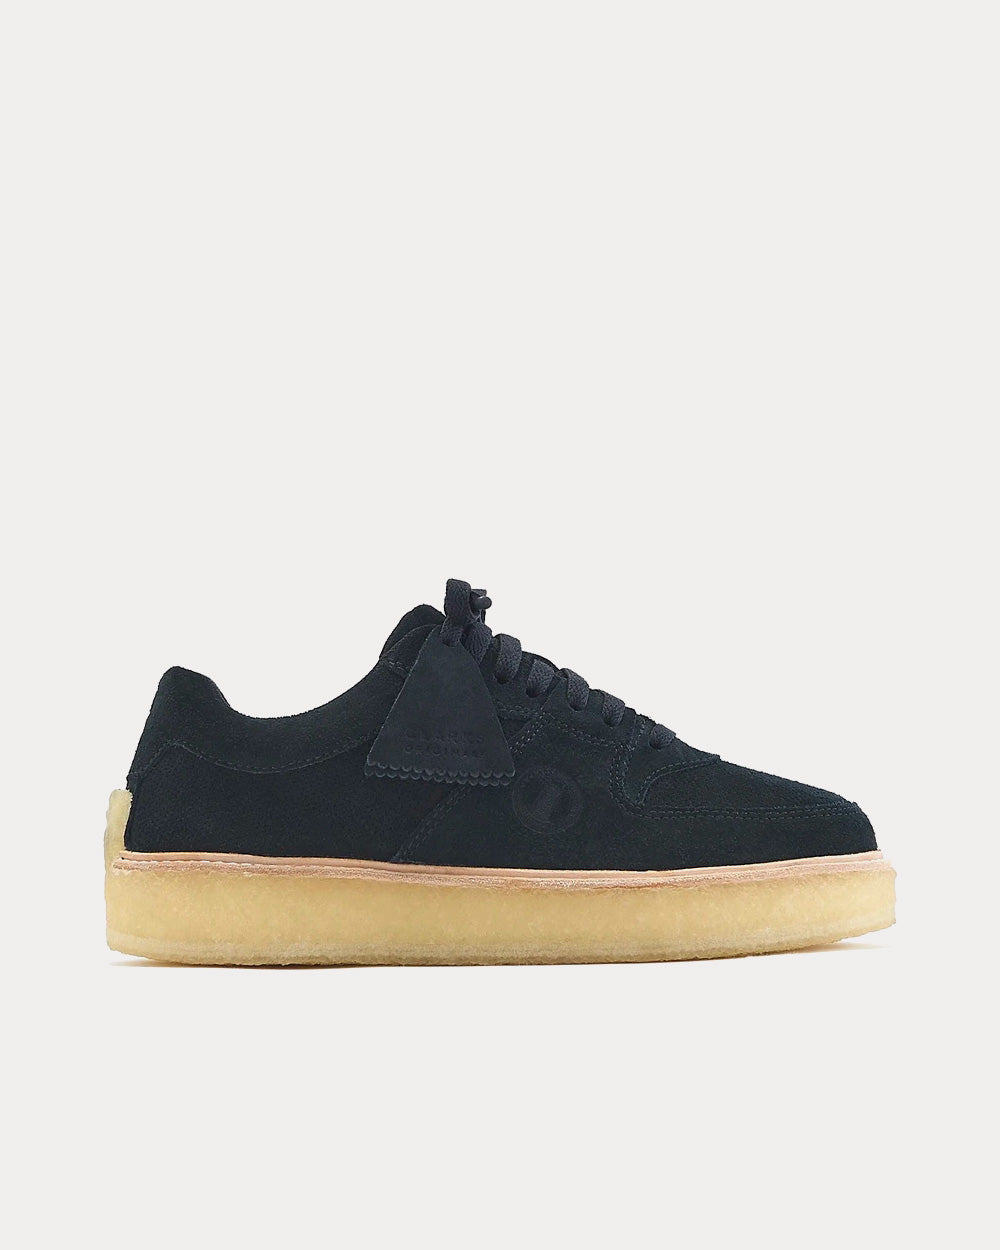 Clarks x Kith - Sandford Suede Black Low Top Sneakers